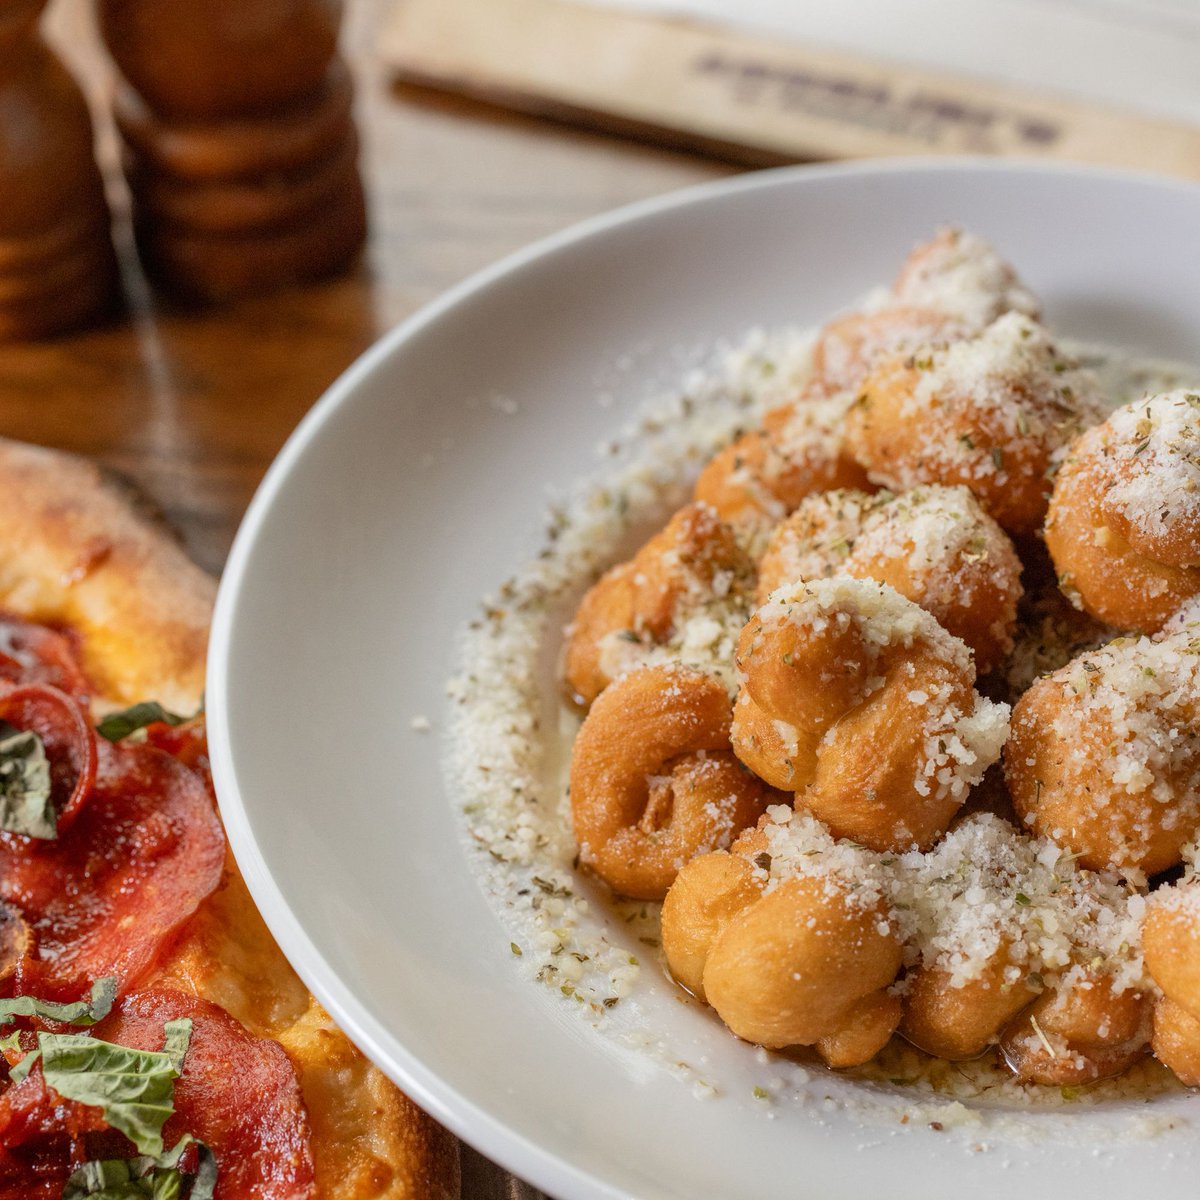 Indulge in the ultimate Italian feast! Dine in with us and receive a mouthwatering bonus of free garlic knots when you purchase any meal. Don't miss out on this delicious offer!

#ItalianFoodie #FreeGarlicKnots #DineInSpecial
#SavorTheFlavors #TemptingOffer